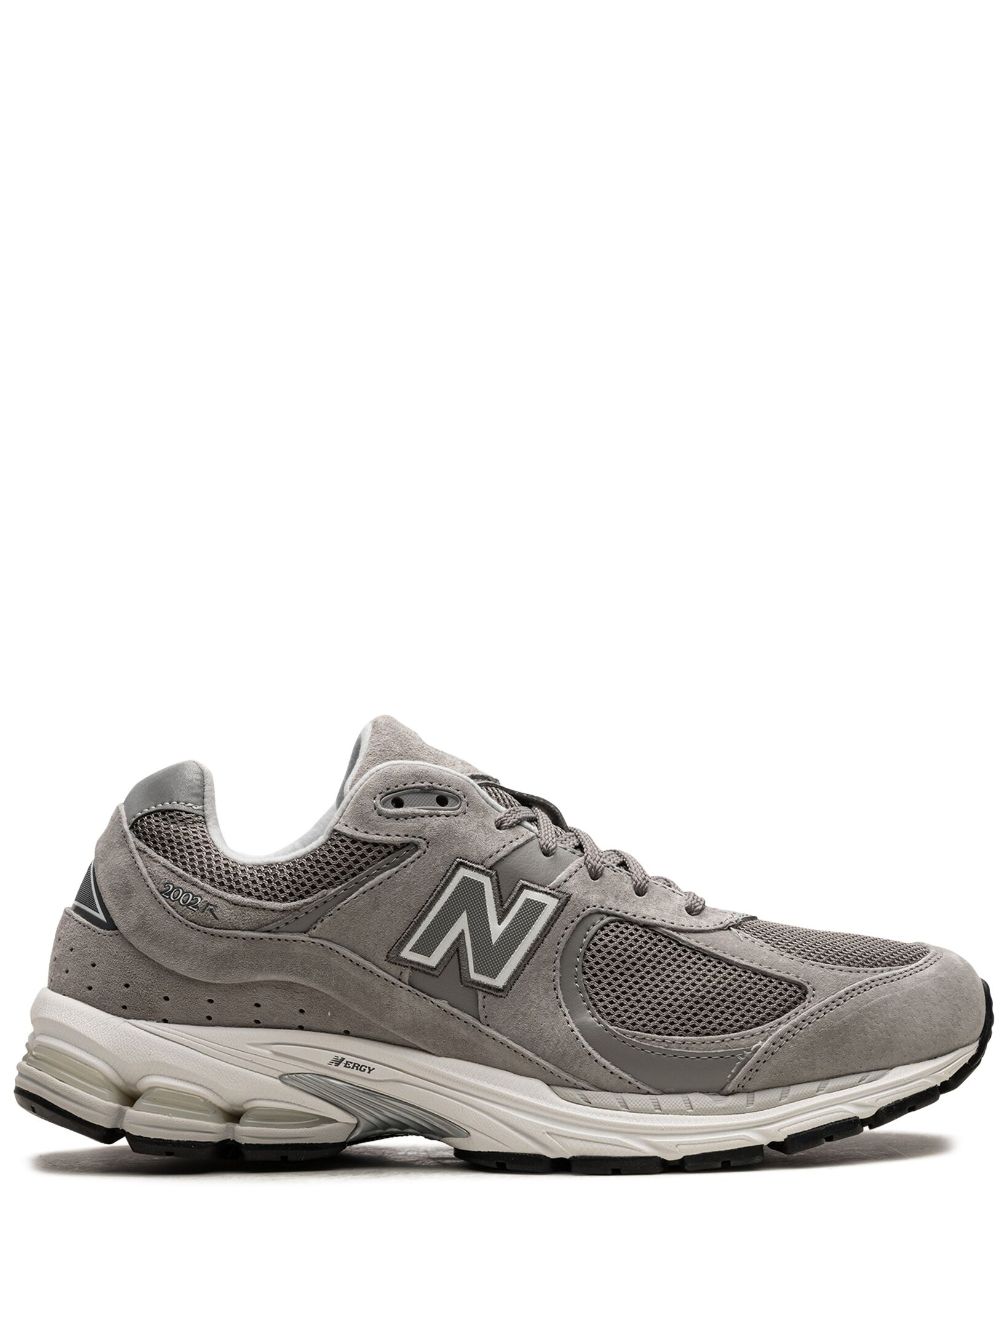 New Balance 2002R "Grey/White" sneakers